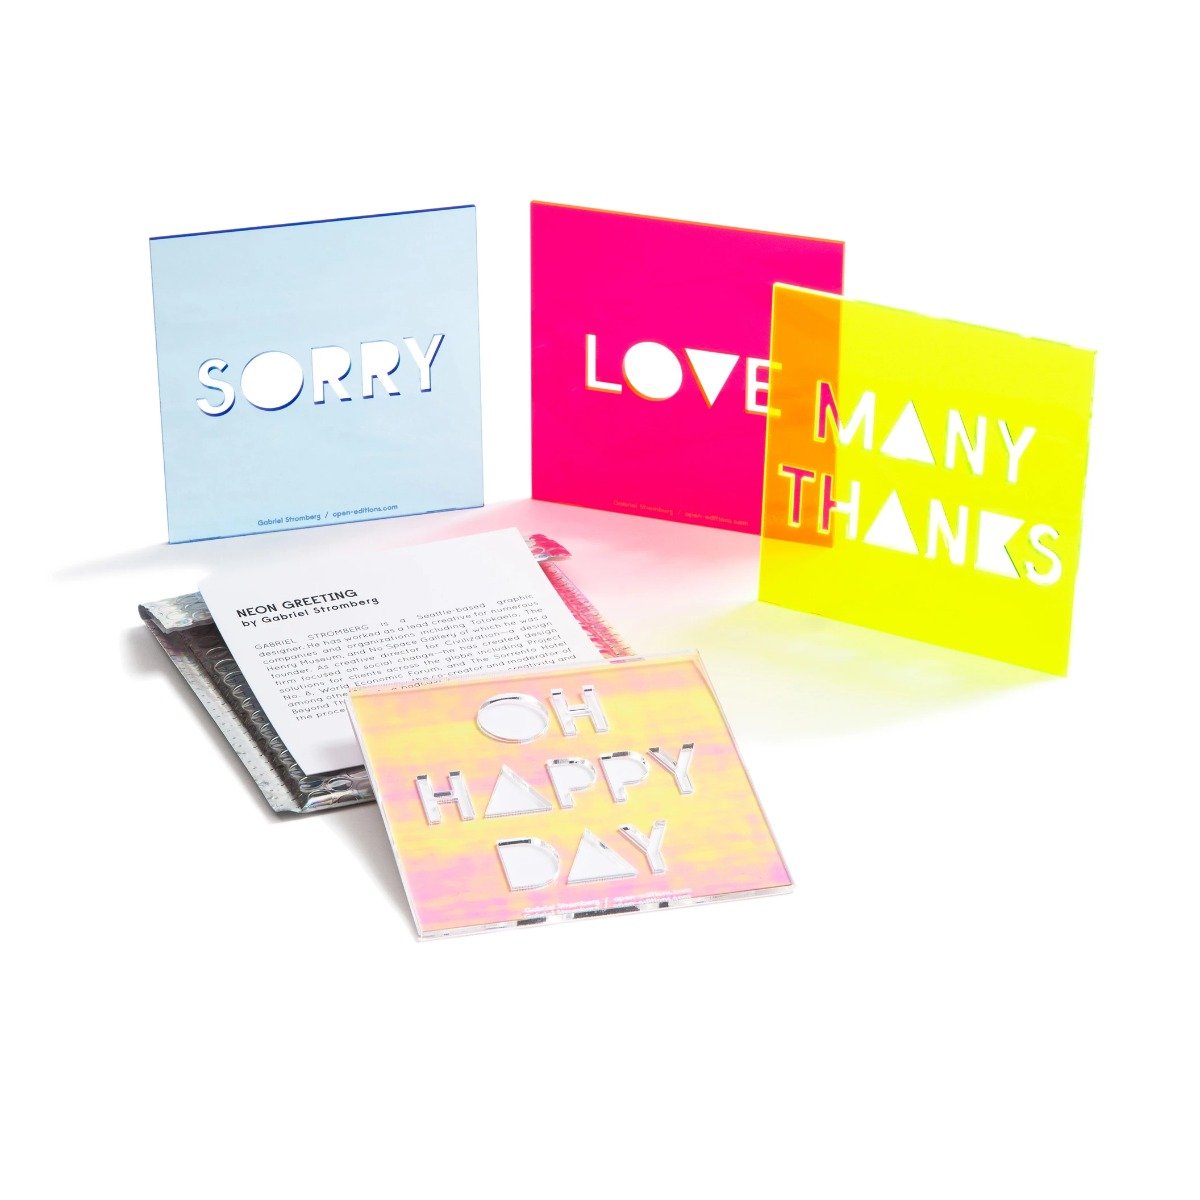 The Oh Happy Day Neon Greeting Card displayed with its packaging and other neon cards.